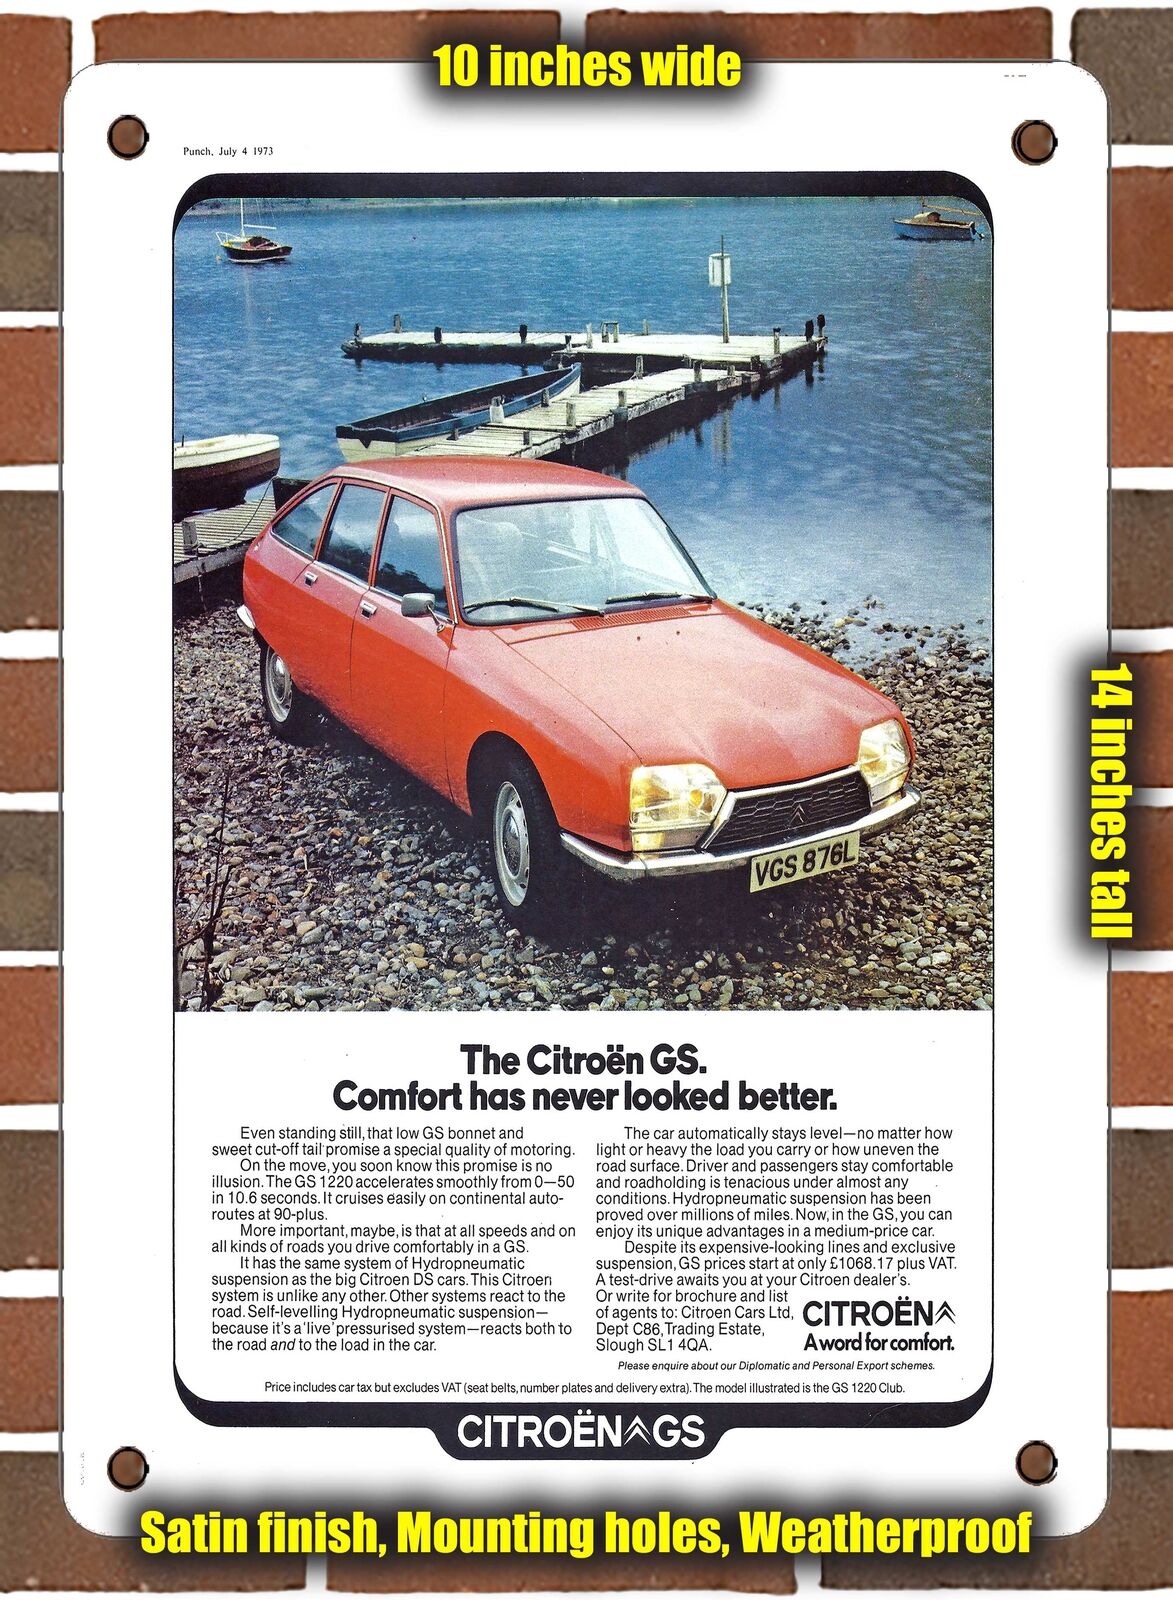 METAL SIGN - 1973 Citroen GS Comfort Has Never Looked Better - 10x14 Inches